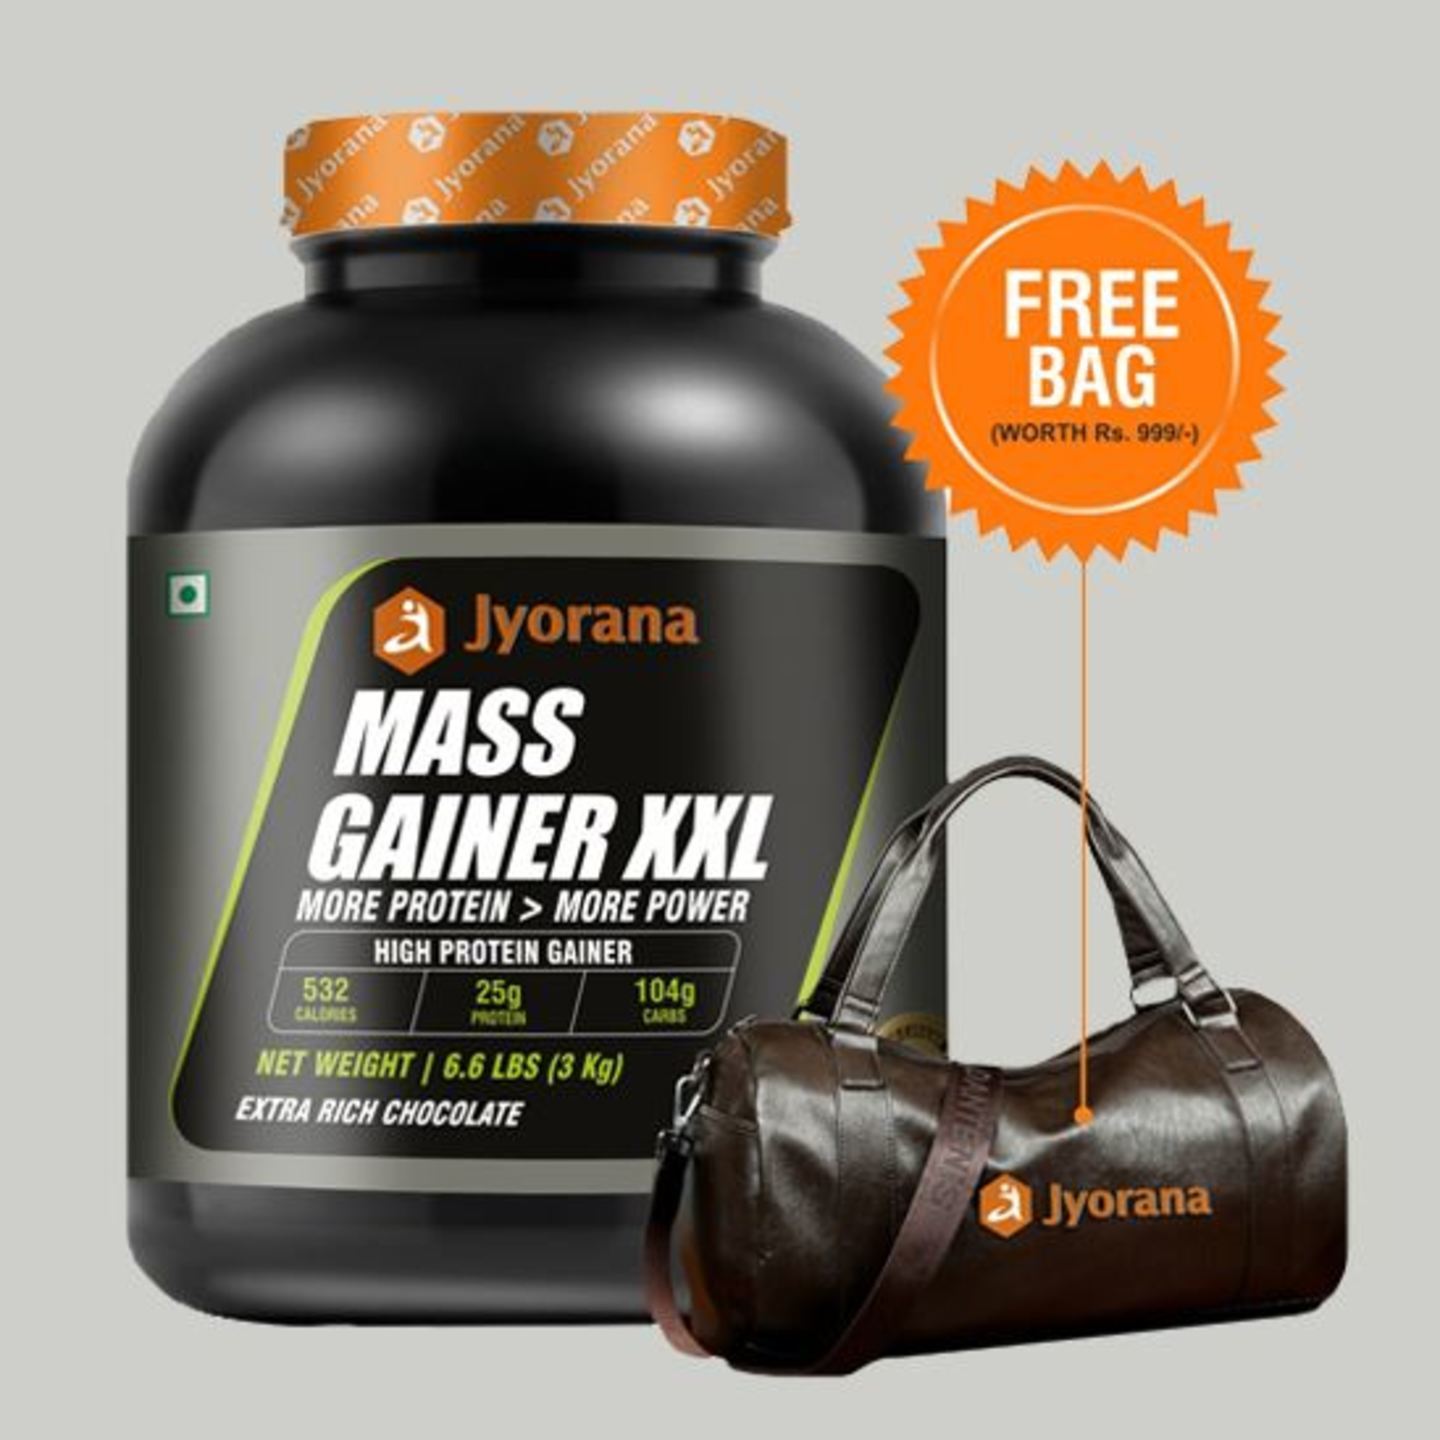 Jyorana Mass Gainer Extra Rich Chocolate Flavor with Free Sports Bag - 3 Kg